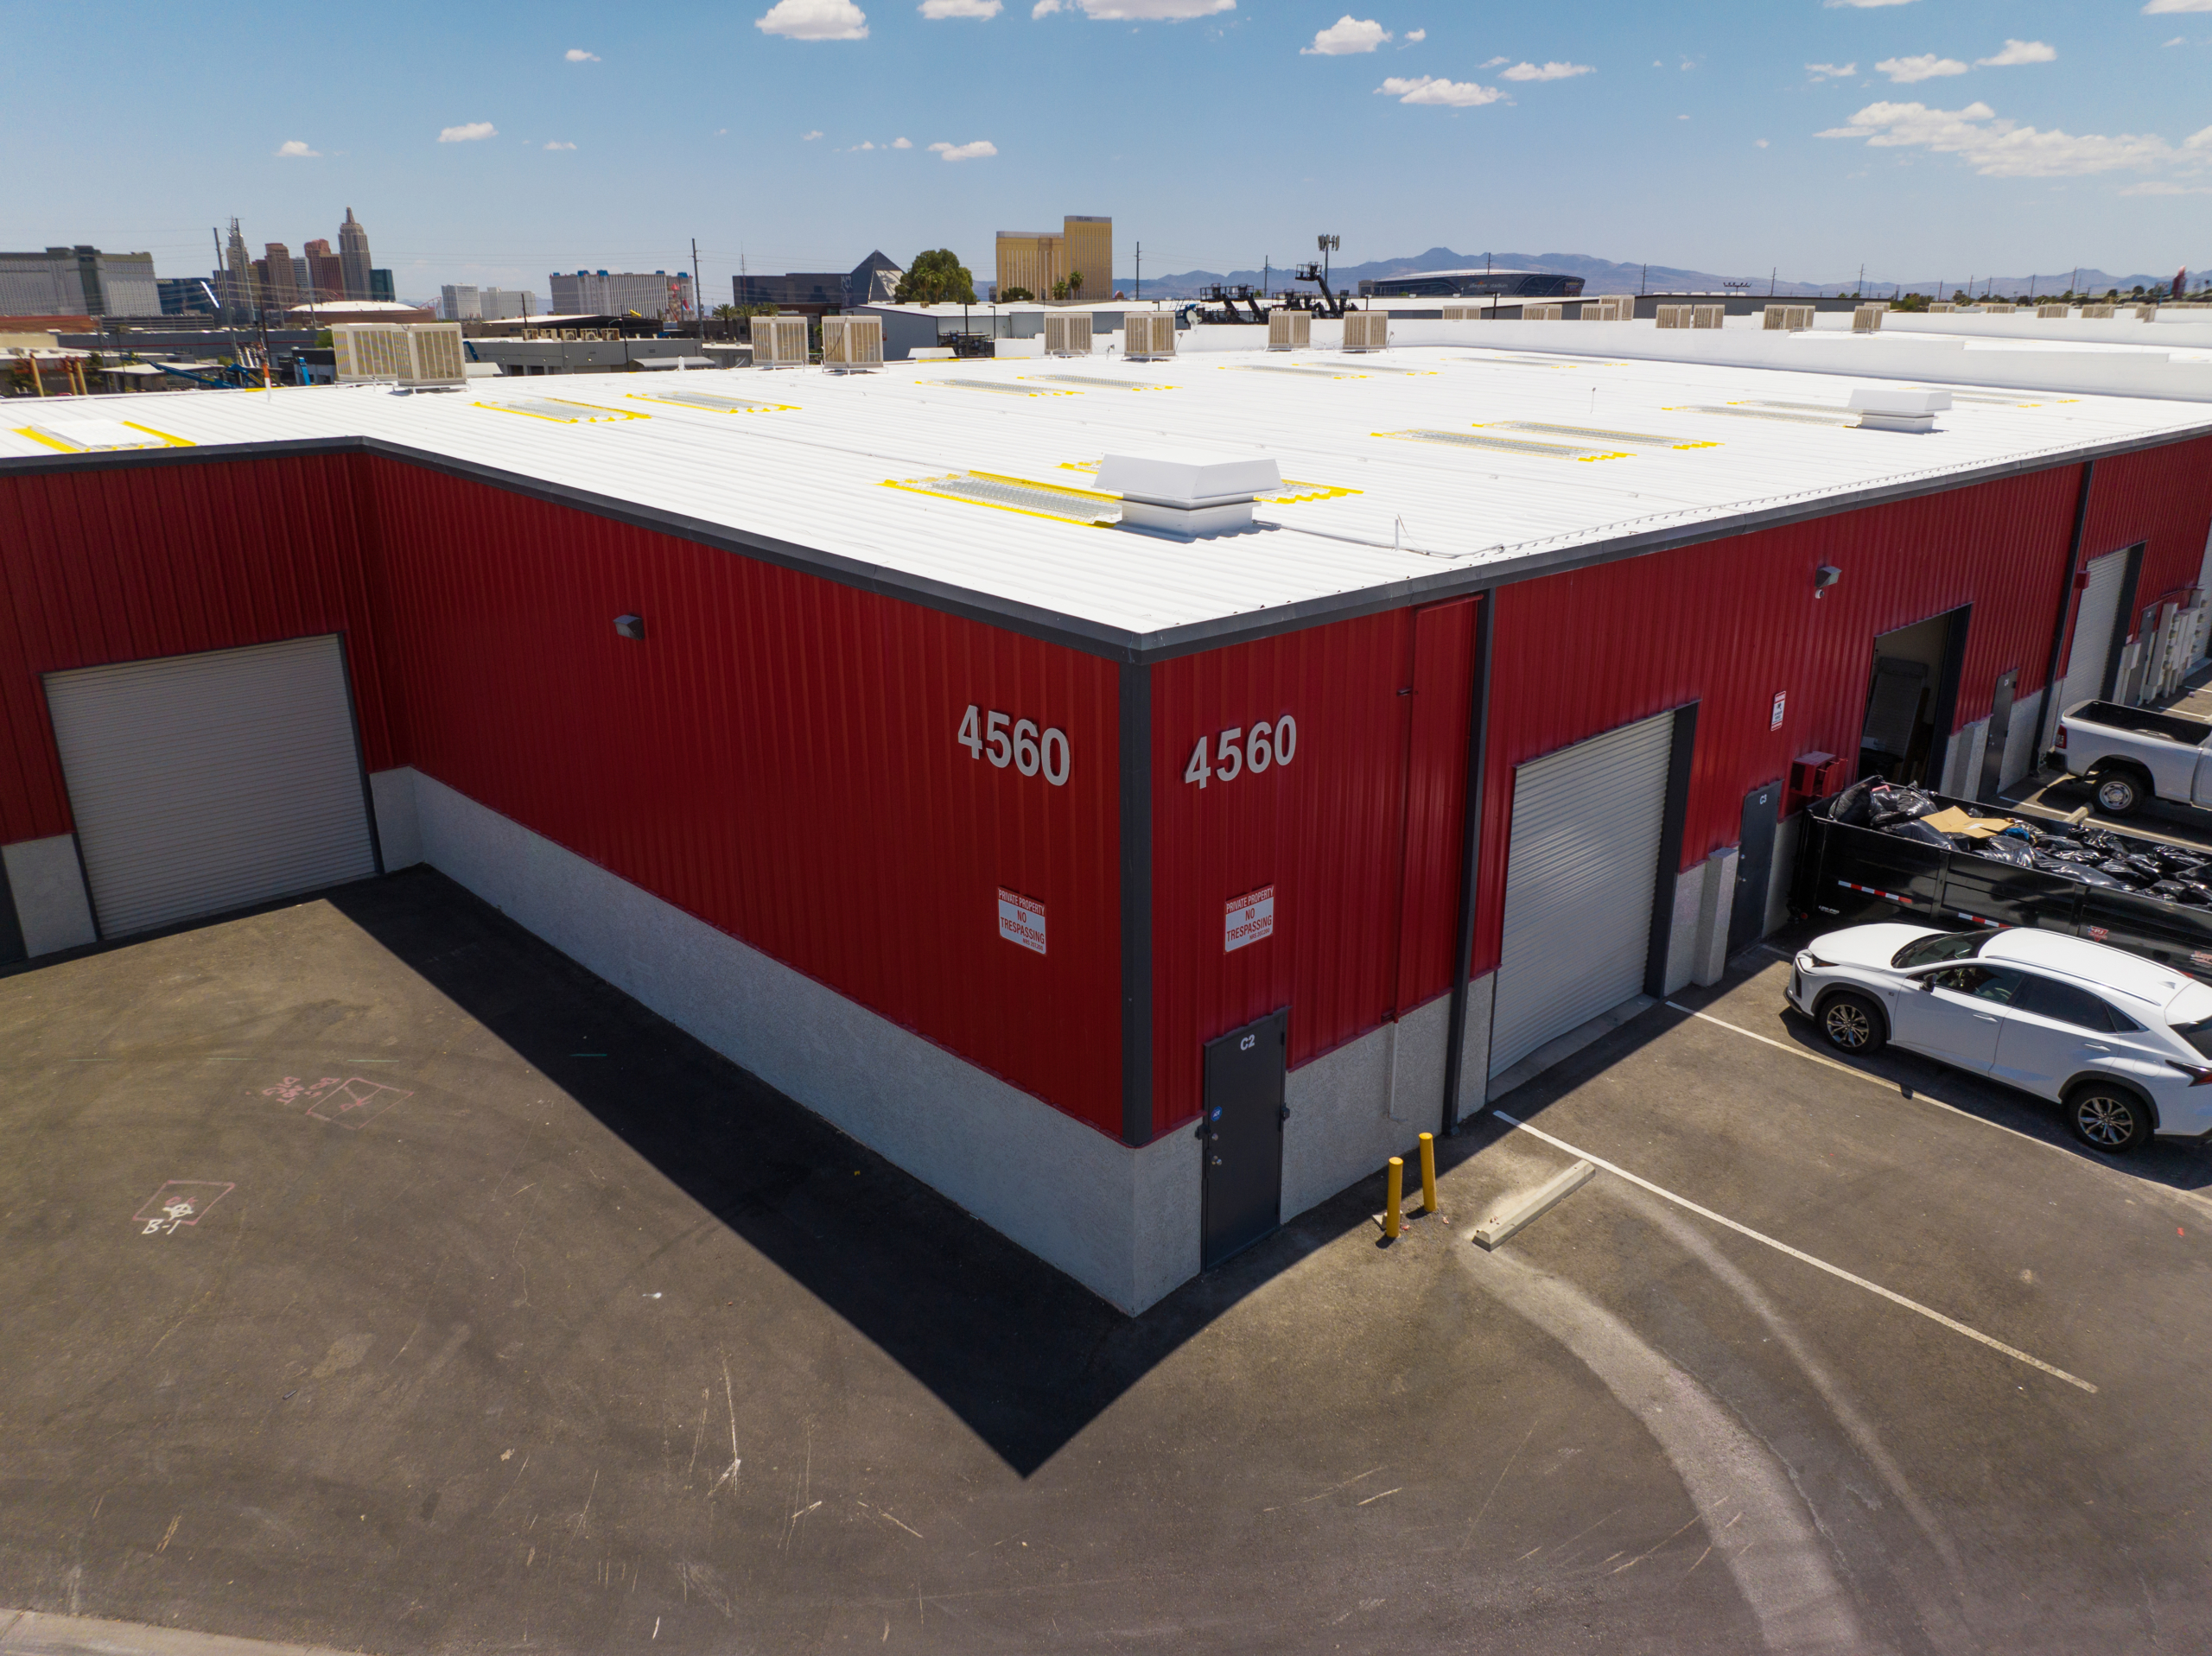 A large red industrial building with the numbers 4560 displayed prominently. The building has multiple garage doors, a small side door, and is surrounded by a paved area with some parked vehicles.